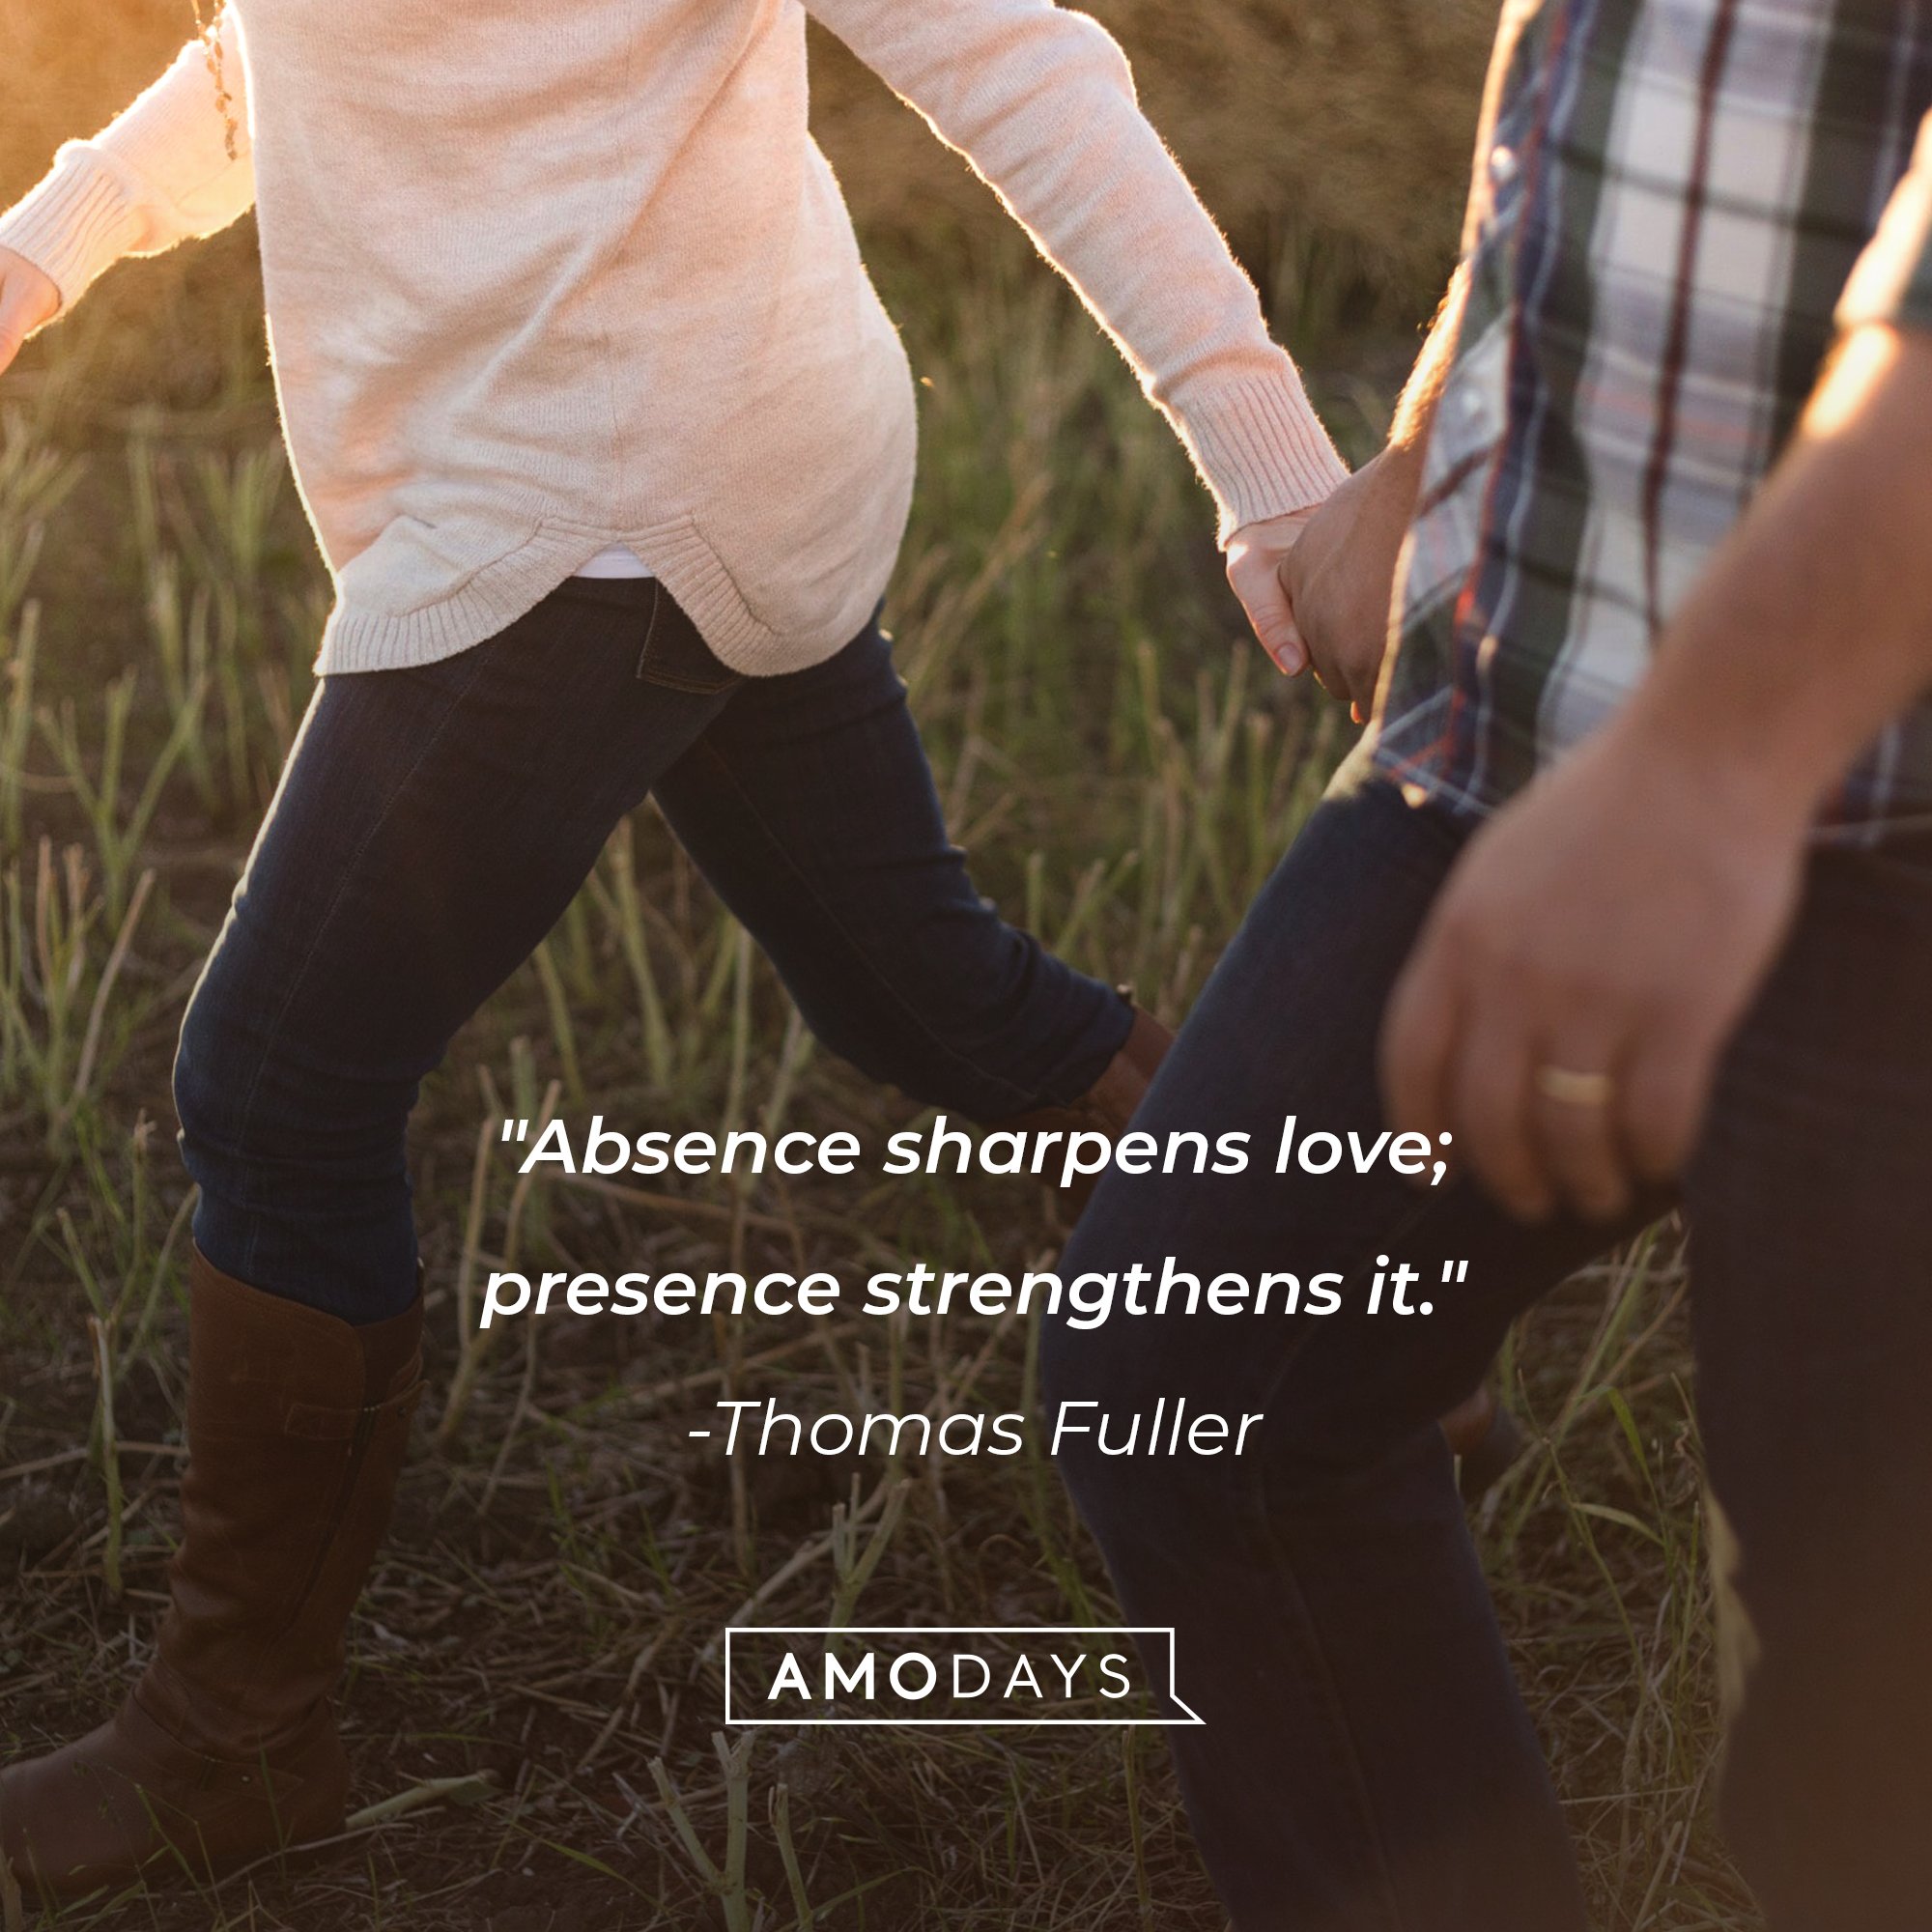 Thomas Fuller’s quote: "Absence sharpens love; presence strengthens it." | Image: AmoDays 